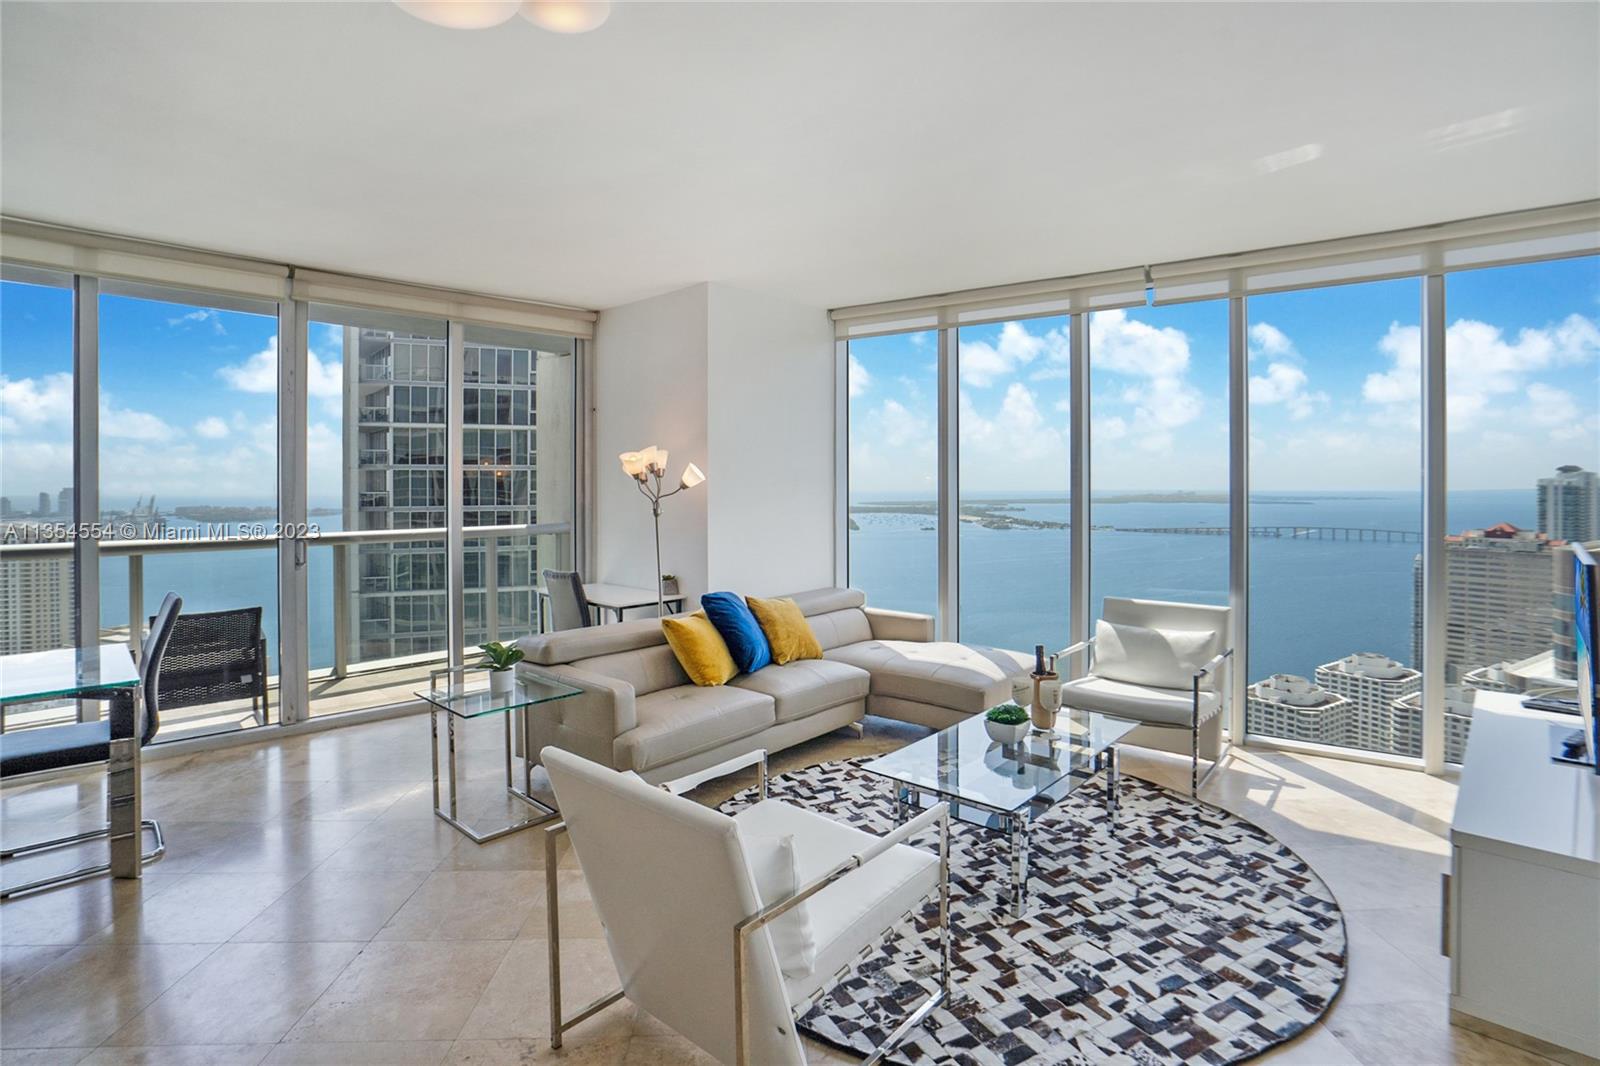 CORNER UNIT HIGH FLOOR BEST FLOOR PLAN!!Stunning Bay Views from 47TH Floor "C" Line Unit. Best Line in W Tower. Gourmet Kitchen, floor to ceiling glass windows. Amenities include: 28,000 sq. ft. spa and fitness center, Wet Deck, W Restaurant, 2-acre pool deck and much more! BRAND NEW AIR/C THE UNIT  CAN BE RENTED DAILY , WEEKLY NO RESTRICTIONS!!!